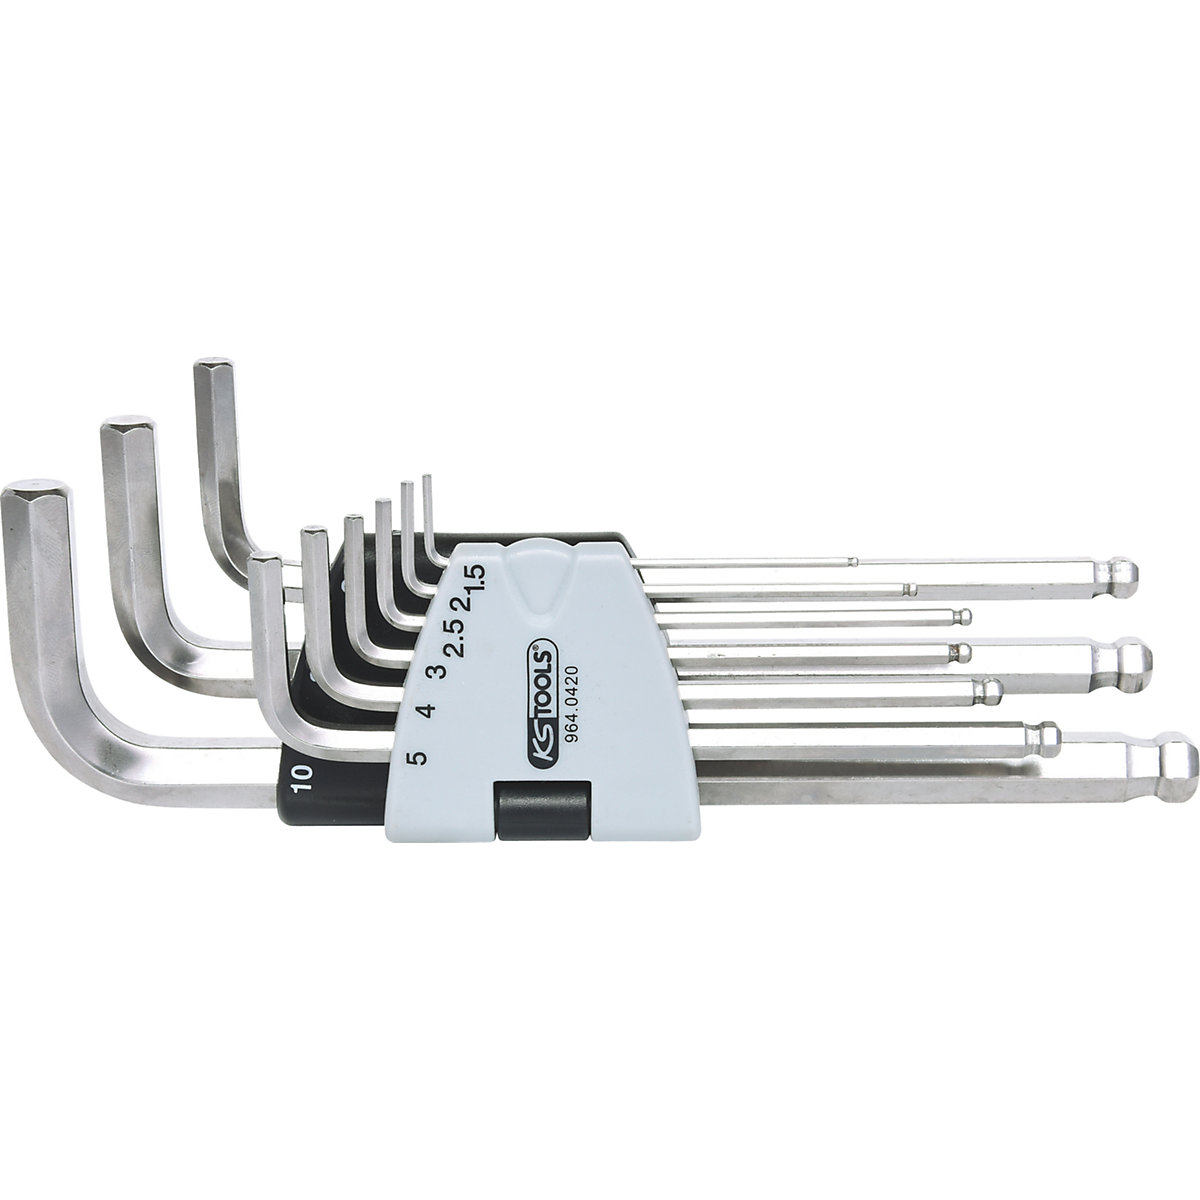 Stainless steel angle key wrench set - KS Tools